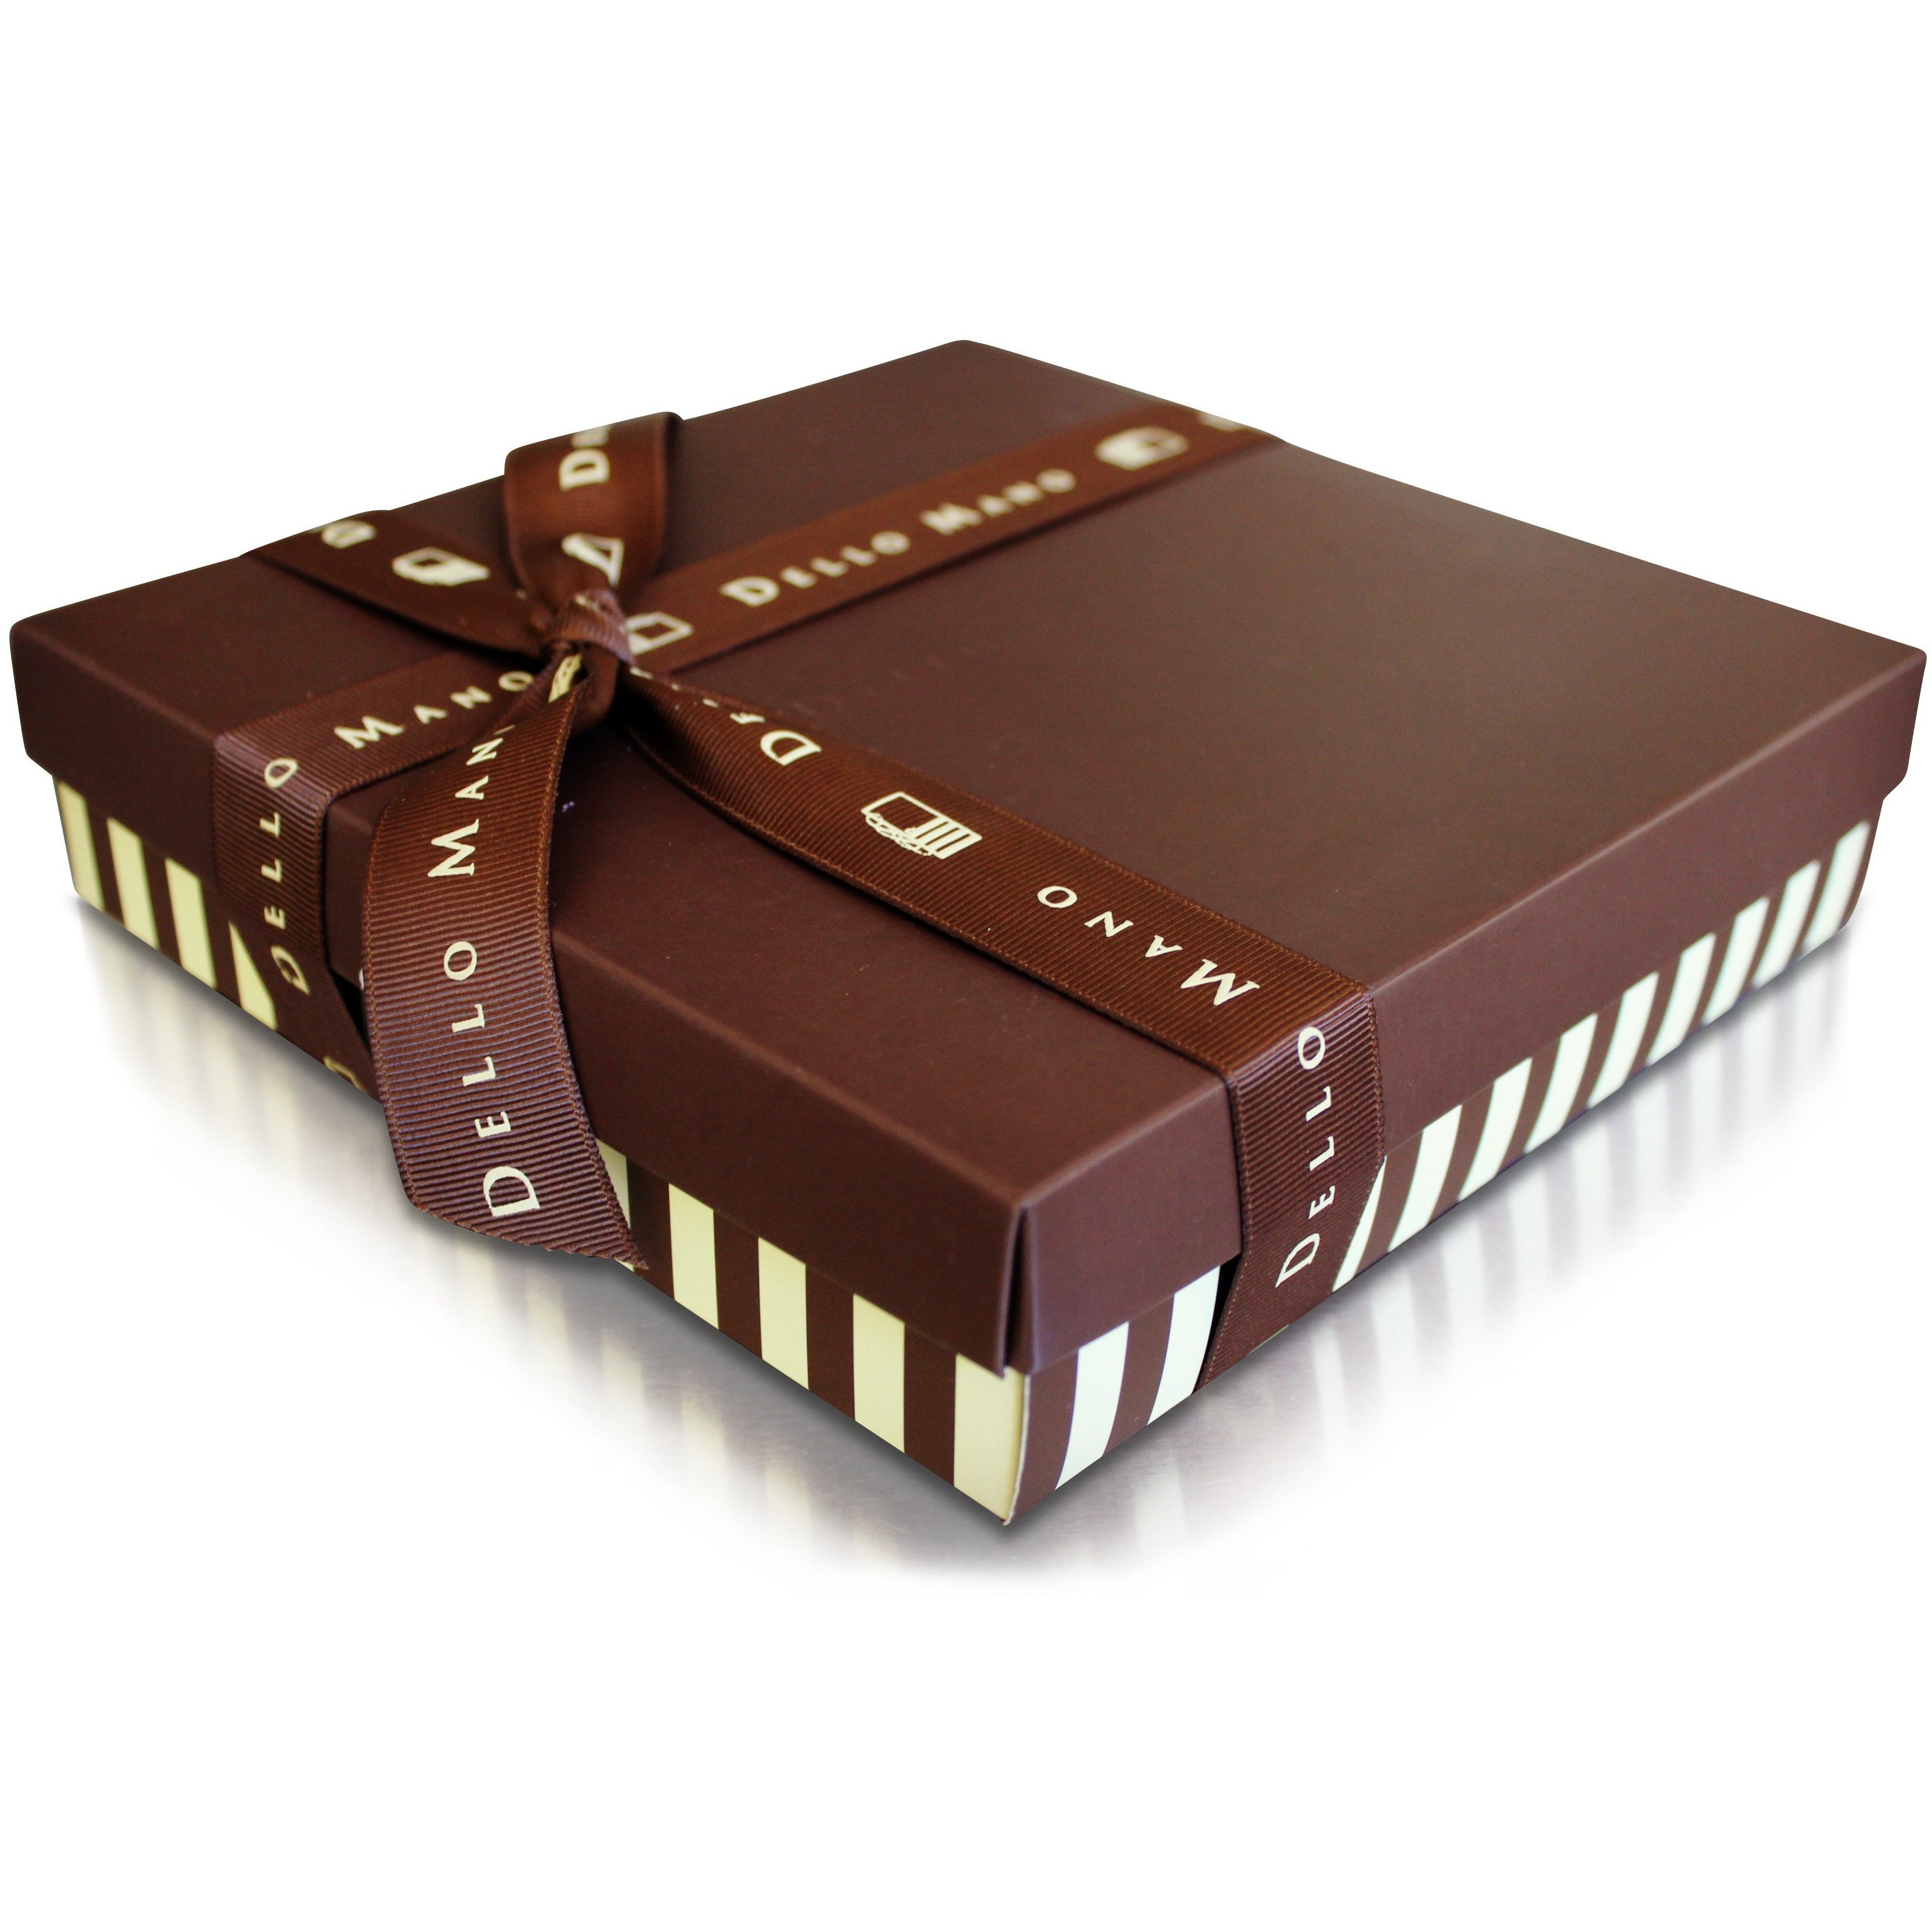 The stylish Brownie Gift Box presents our delicious  chocolate morsels in  a way that says quality and style.